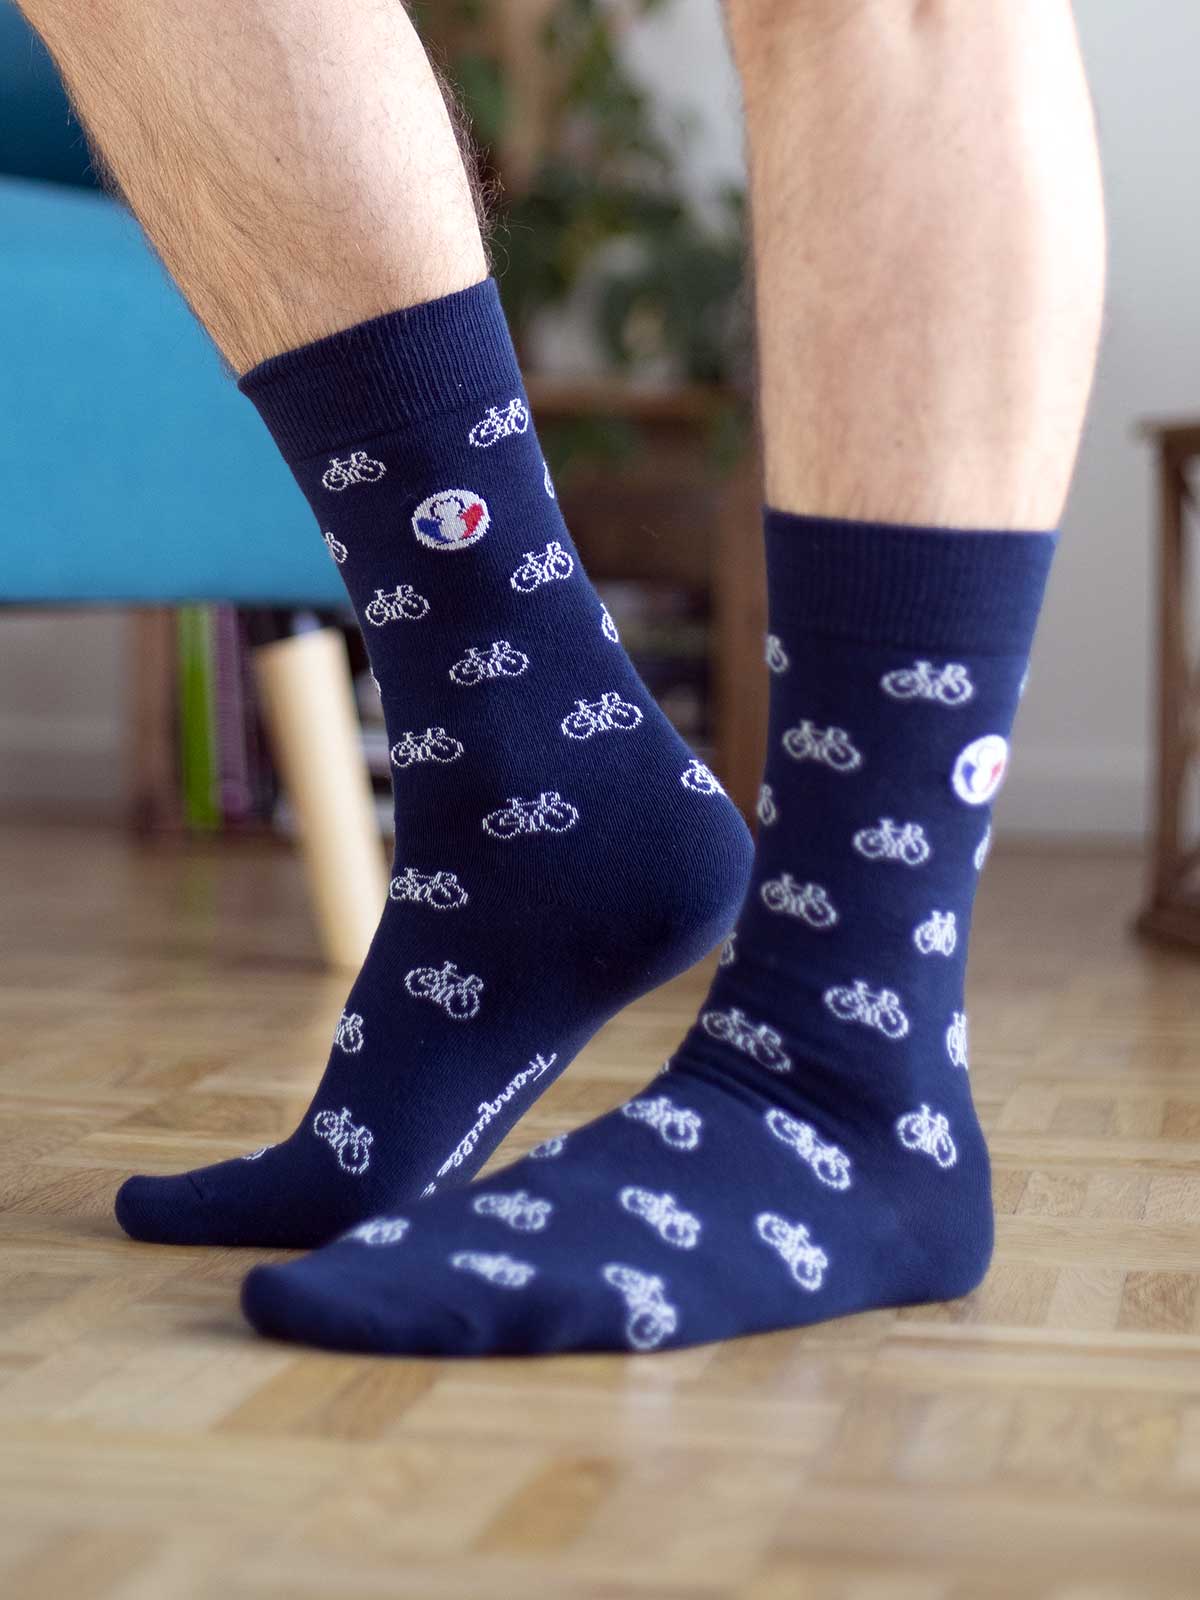 chaussettes-made-in-france-les-velos-bleu-marine-4